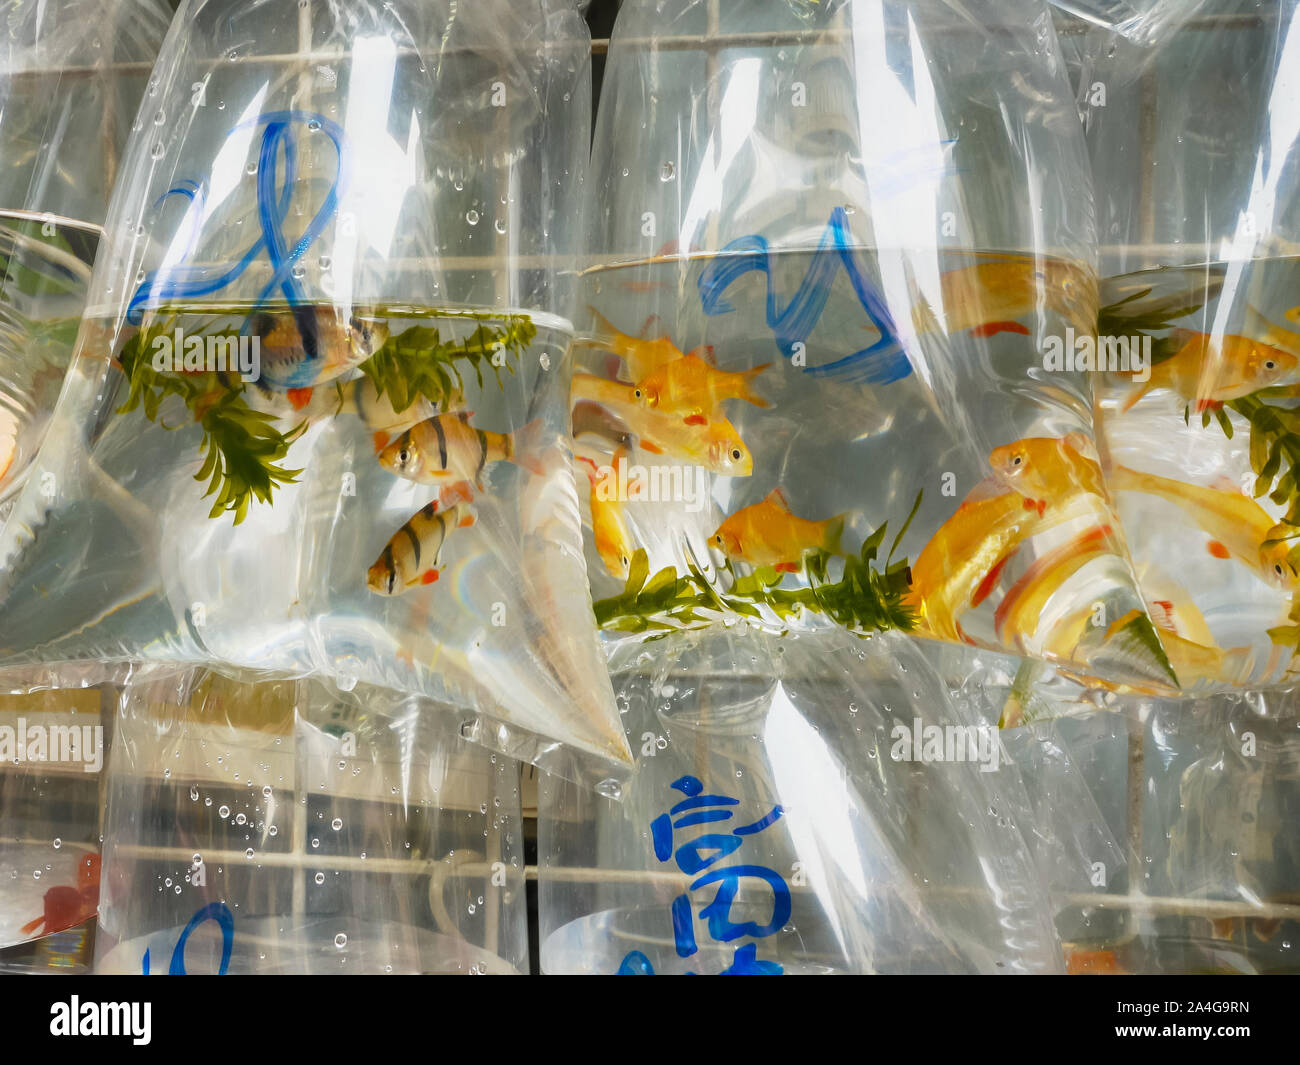 https://c8.alamy.com/comp/2A4G9RN/close-up-of-plastic-bags-containing-tropical-fish-in-mongkok-markets-2A4G9RN.jpg